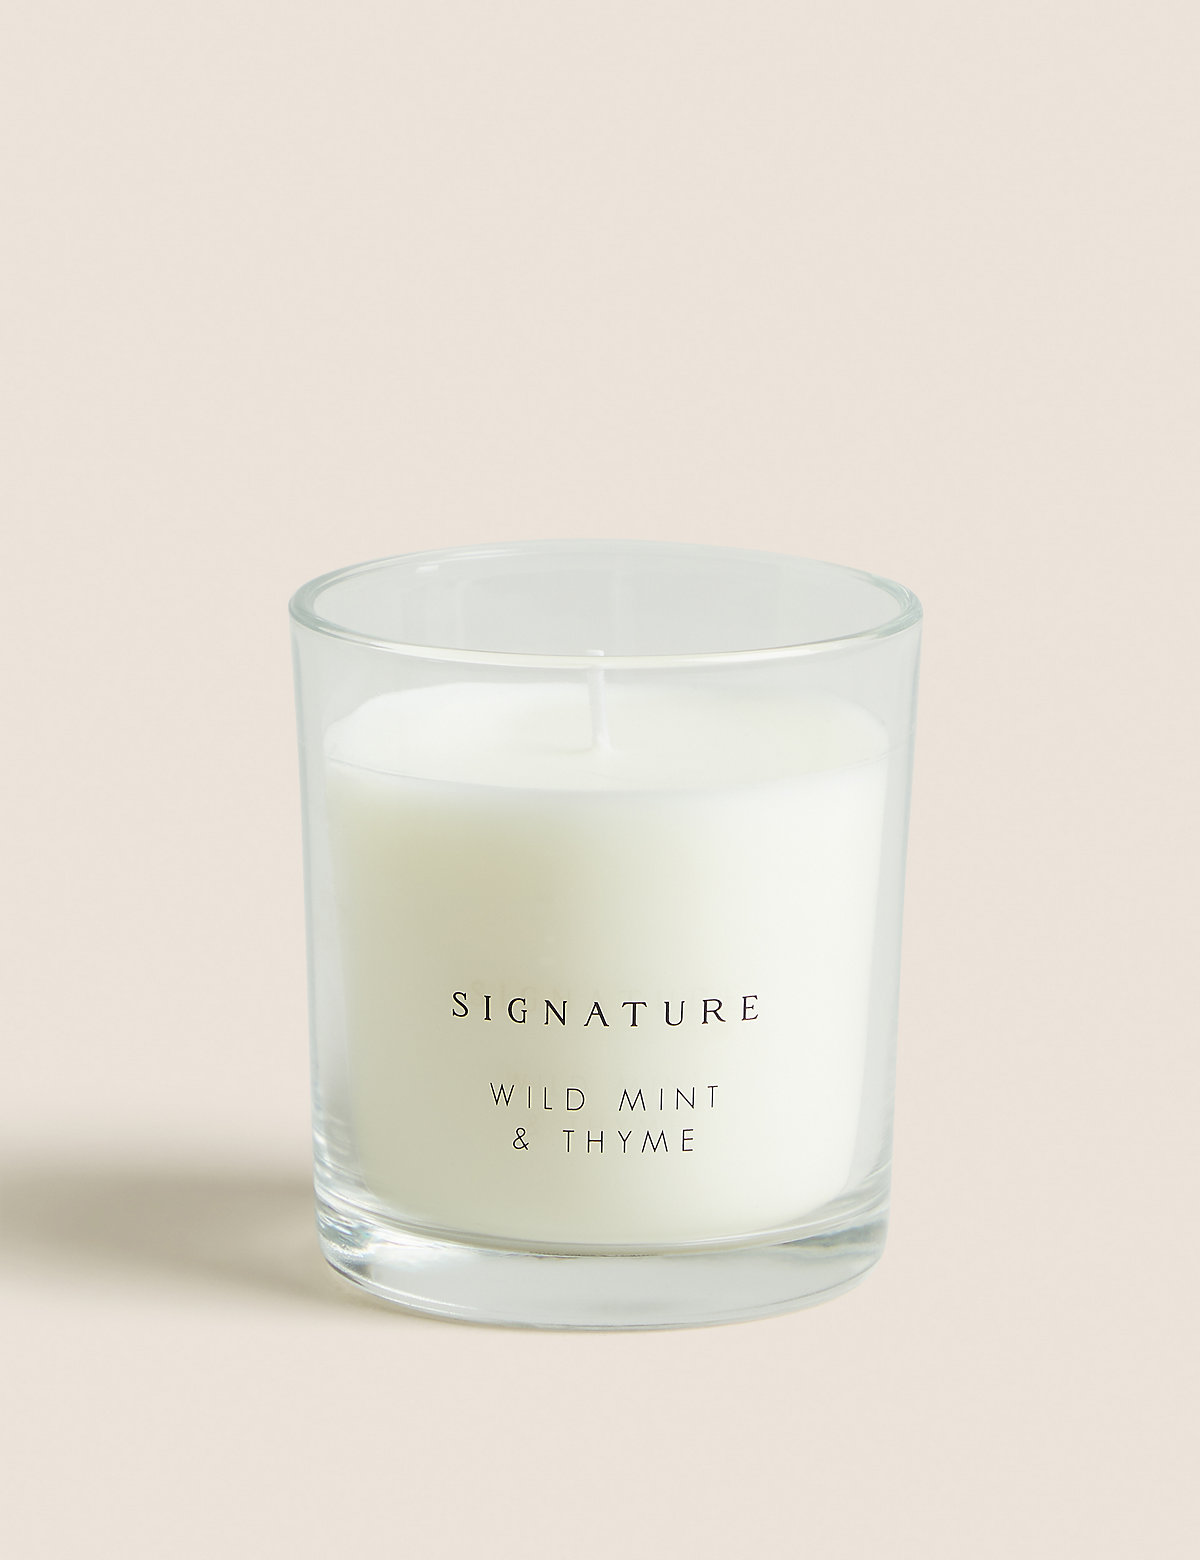 Signature Wild Mint & Thyme Boxed Candle